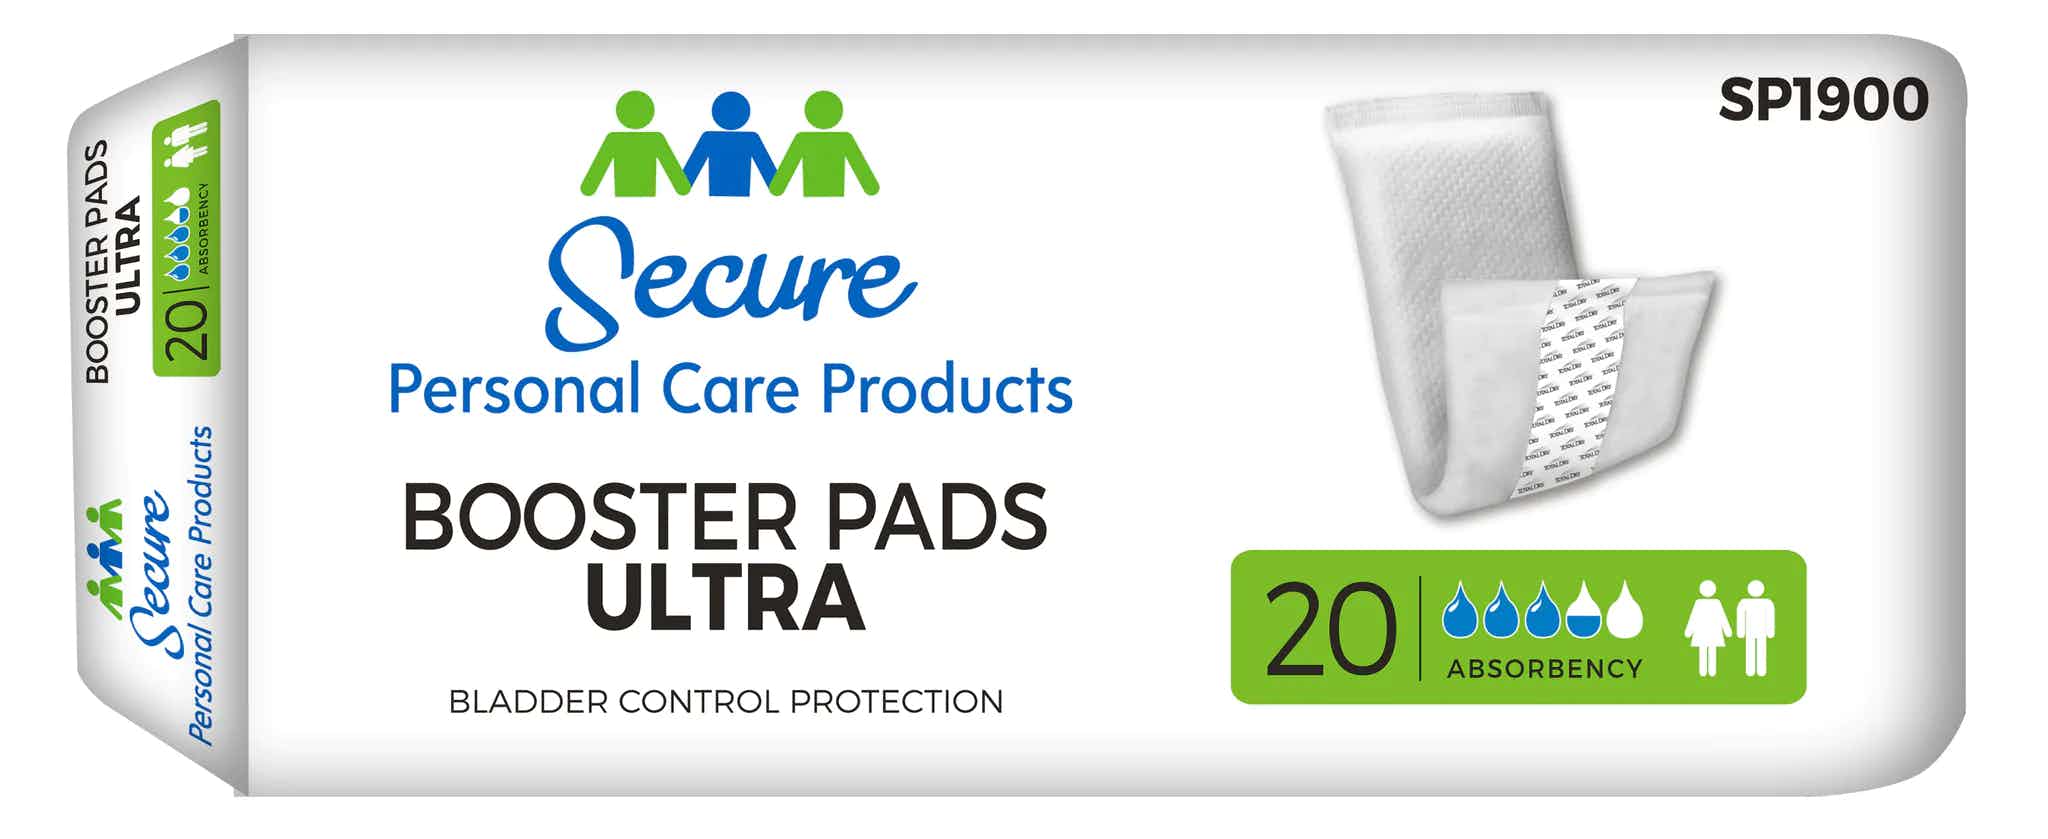 Secure Personal Care Products Booster Pads Ultra, Extra Absorbency, SP1900, Case of 180 (9 Bags)